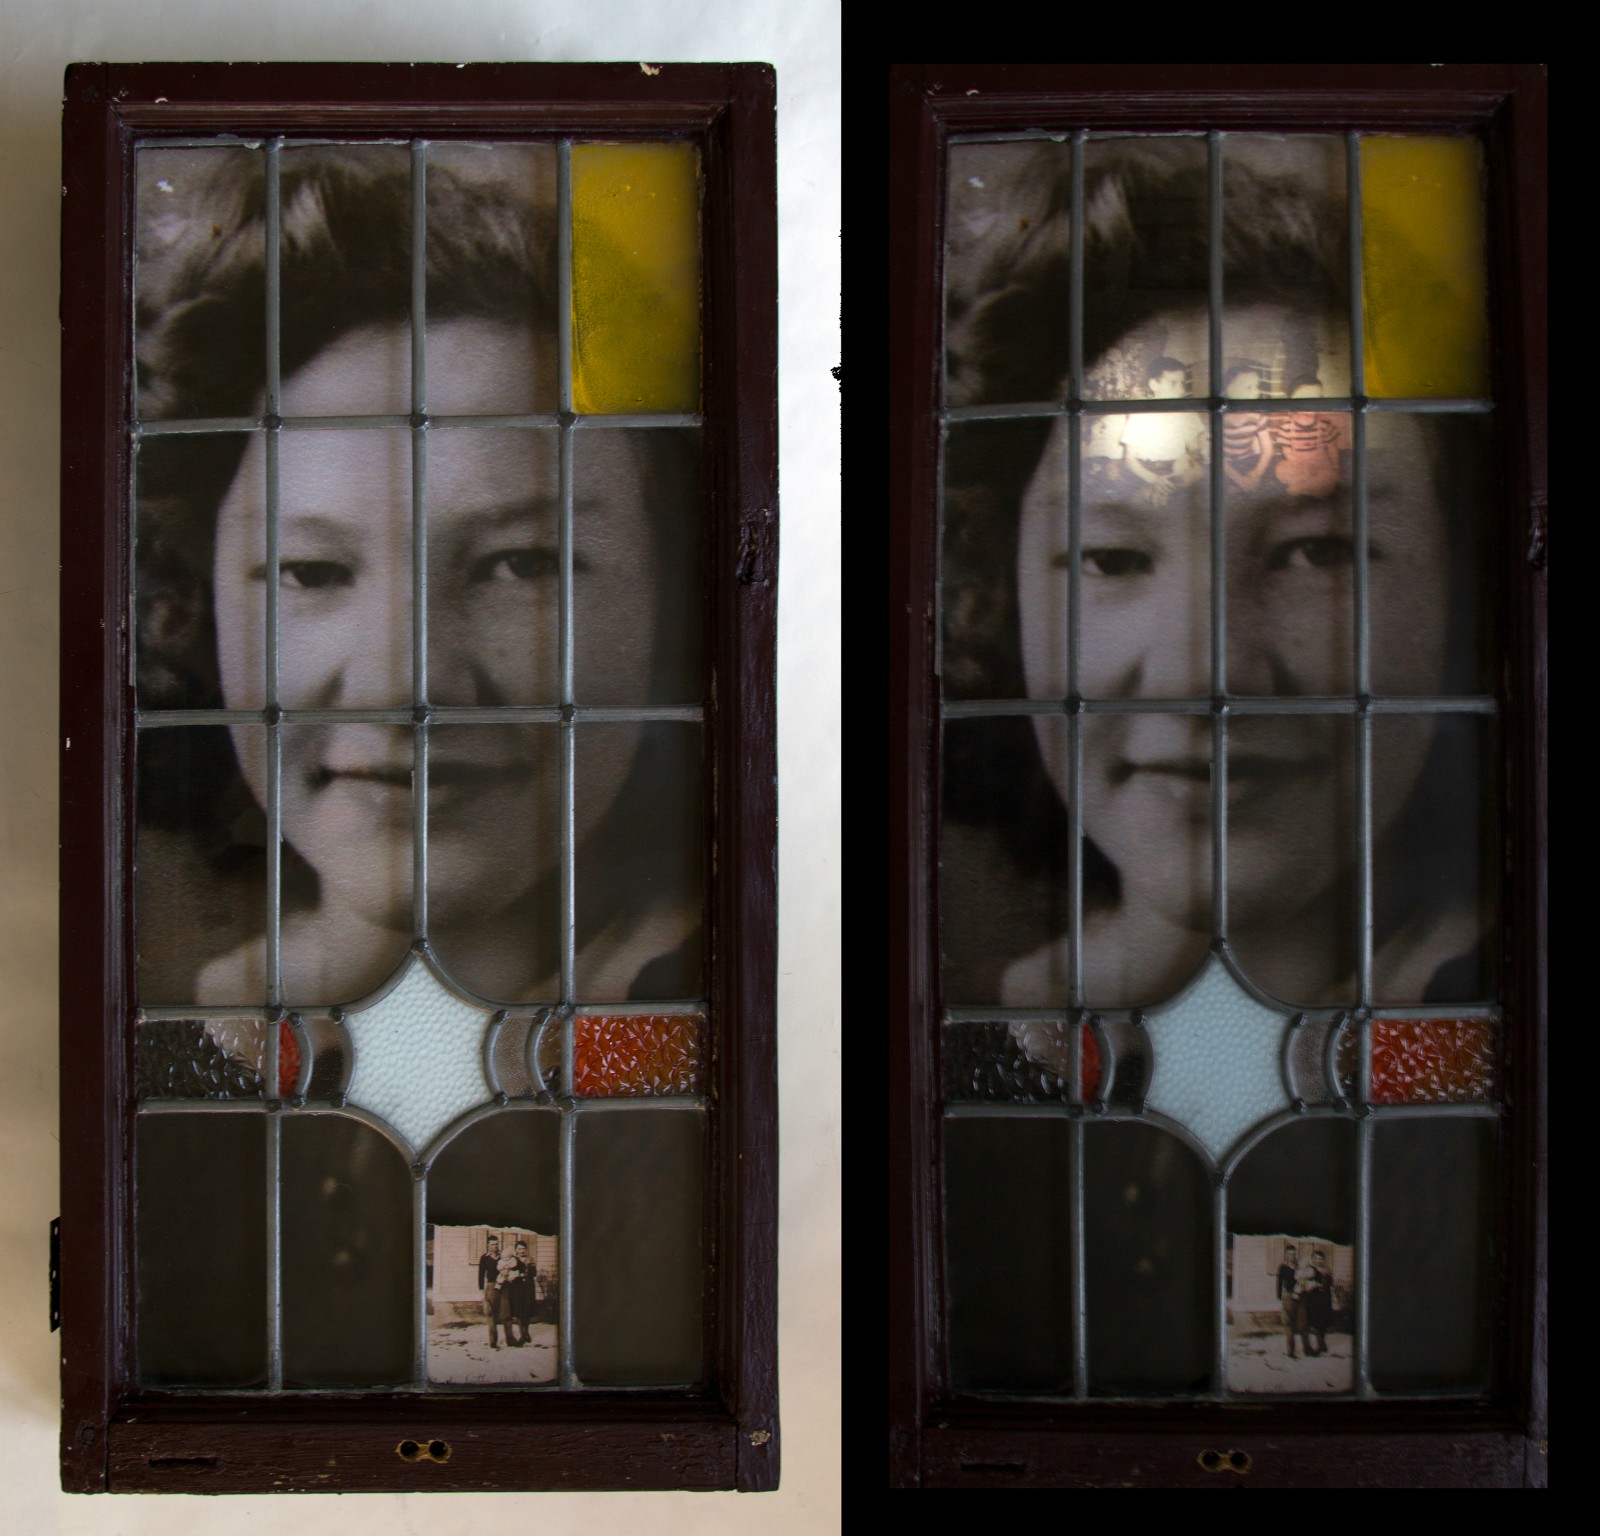 Viewer-Activated Lightbox, 38 x 18.5” (97 x 47cm)